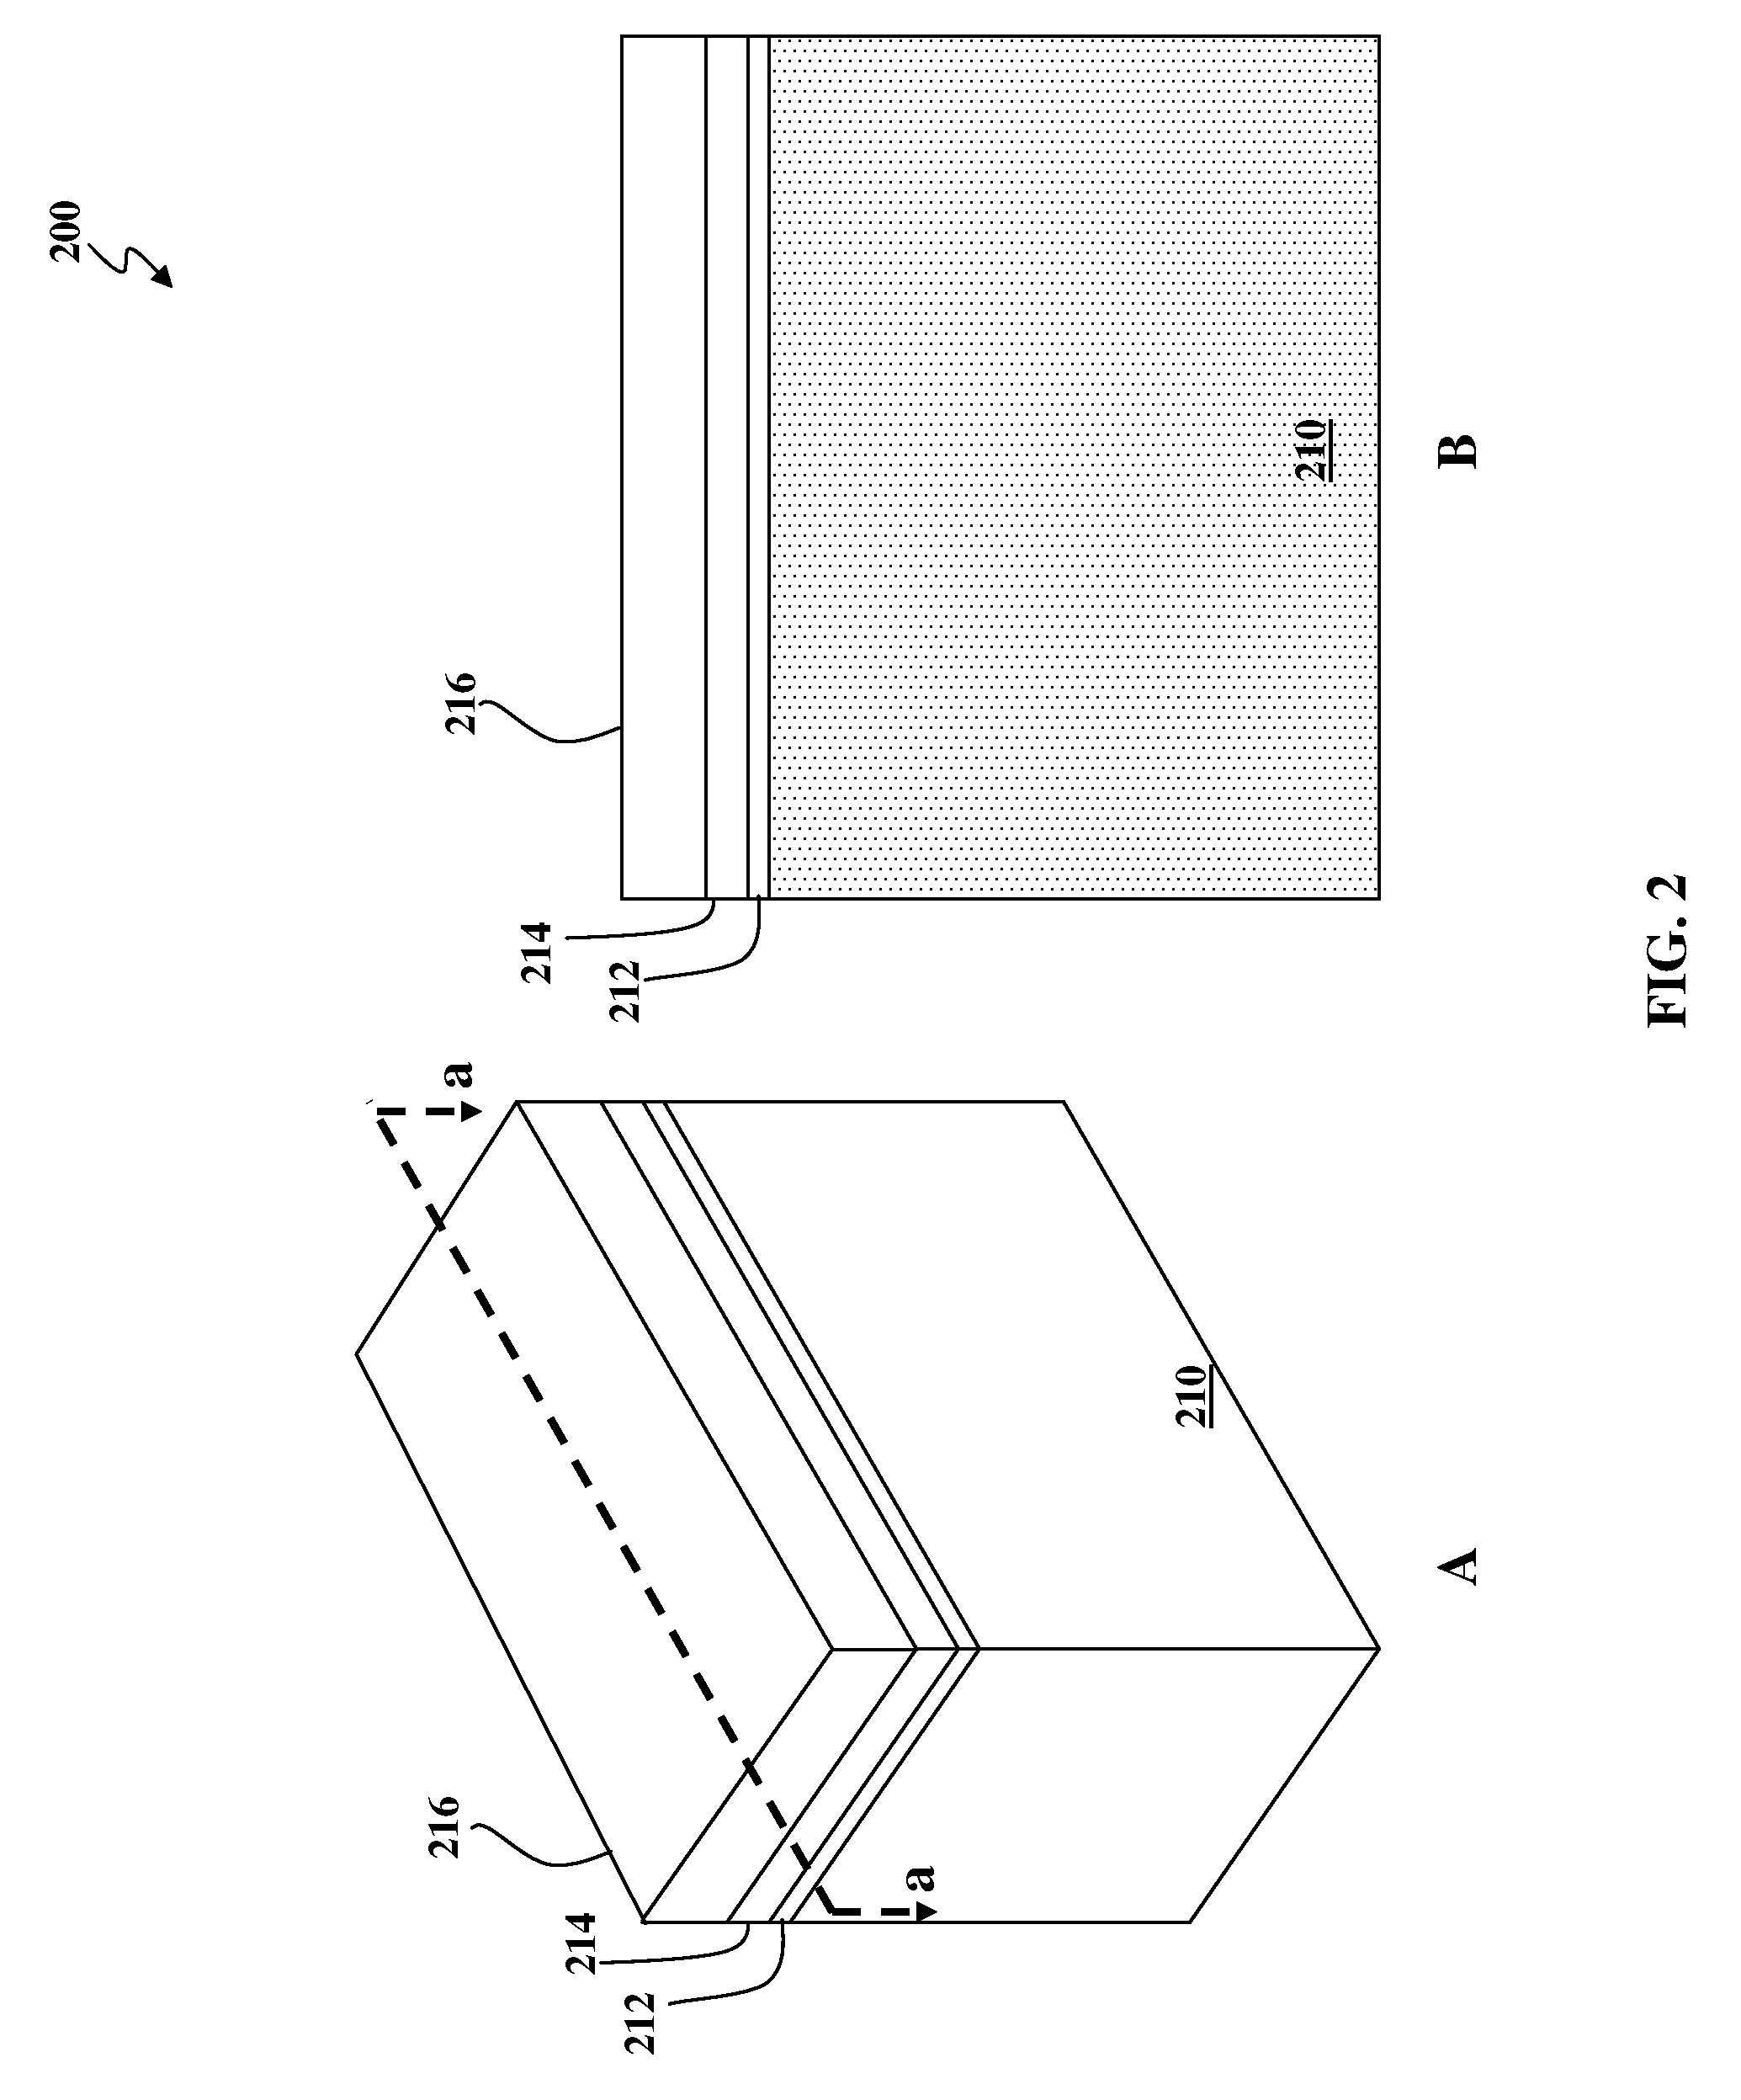 FinFET device and method of manufacturing same